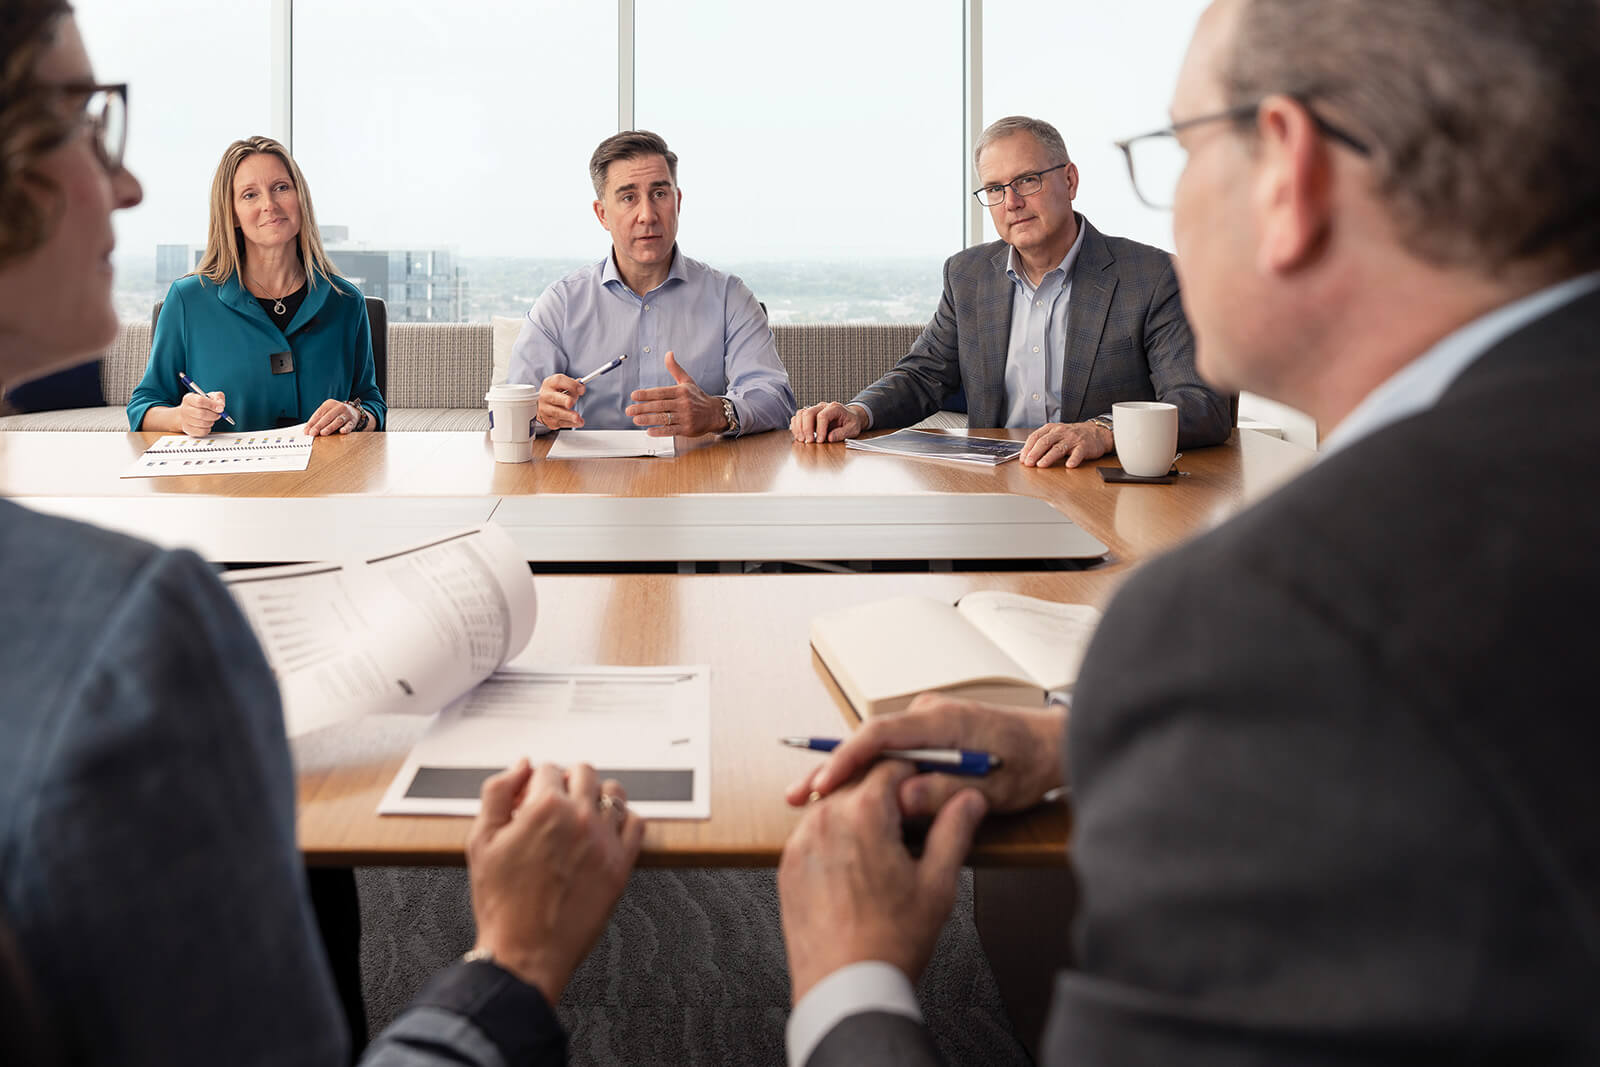 Five associates from Baird's Private Wealth Management team discussing around a conference room table